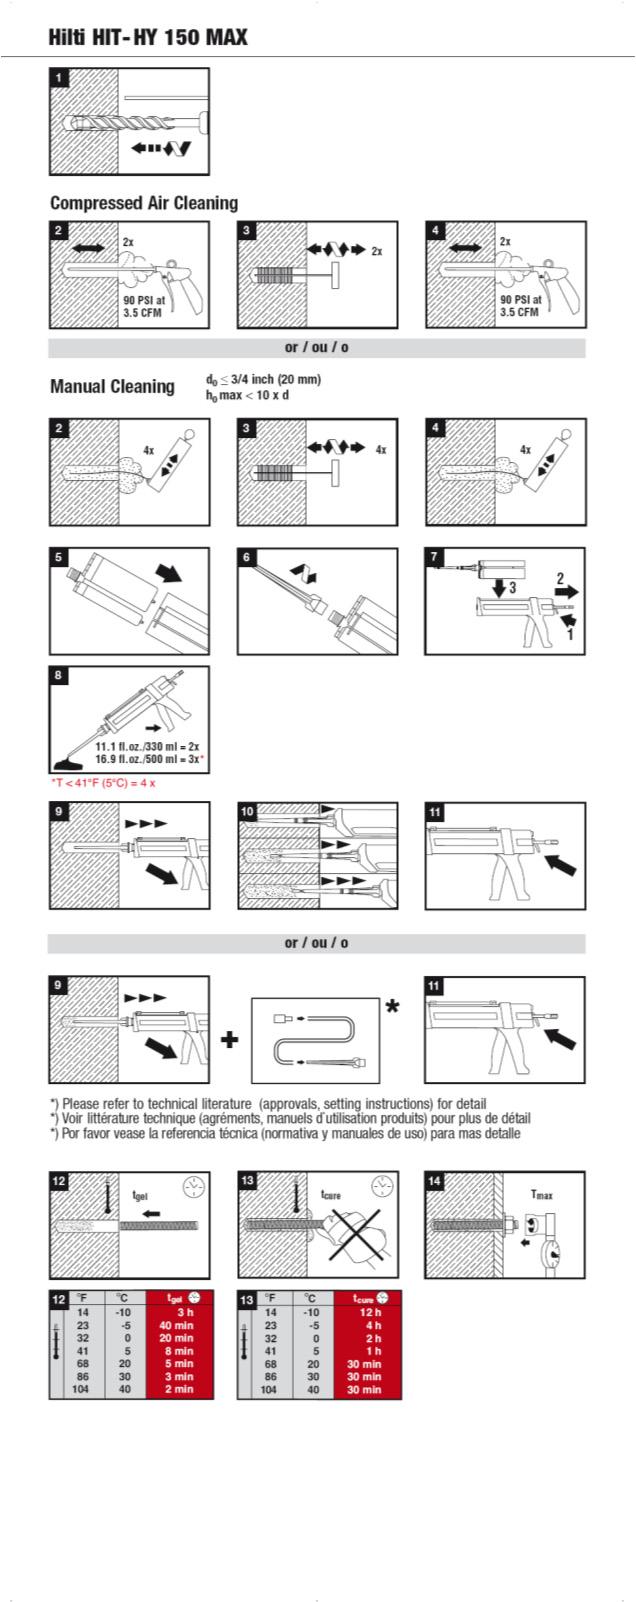 INSTRUCTIONS FOR USE (IFU) AS